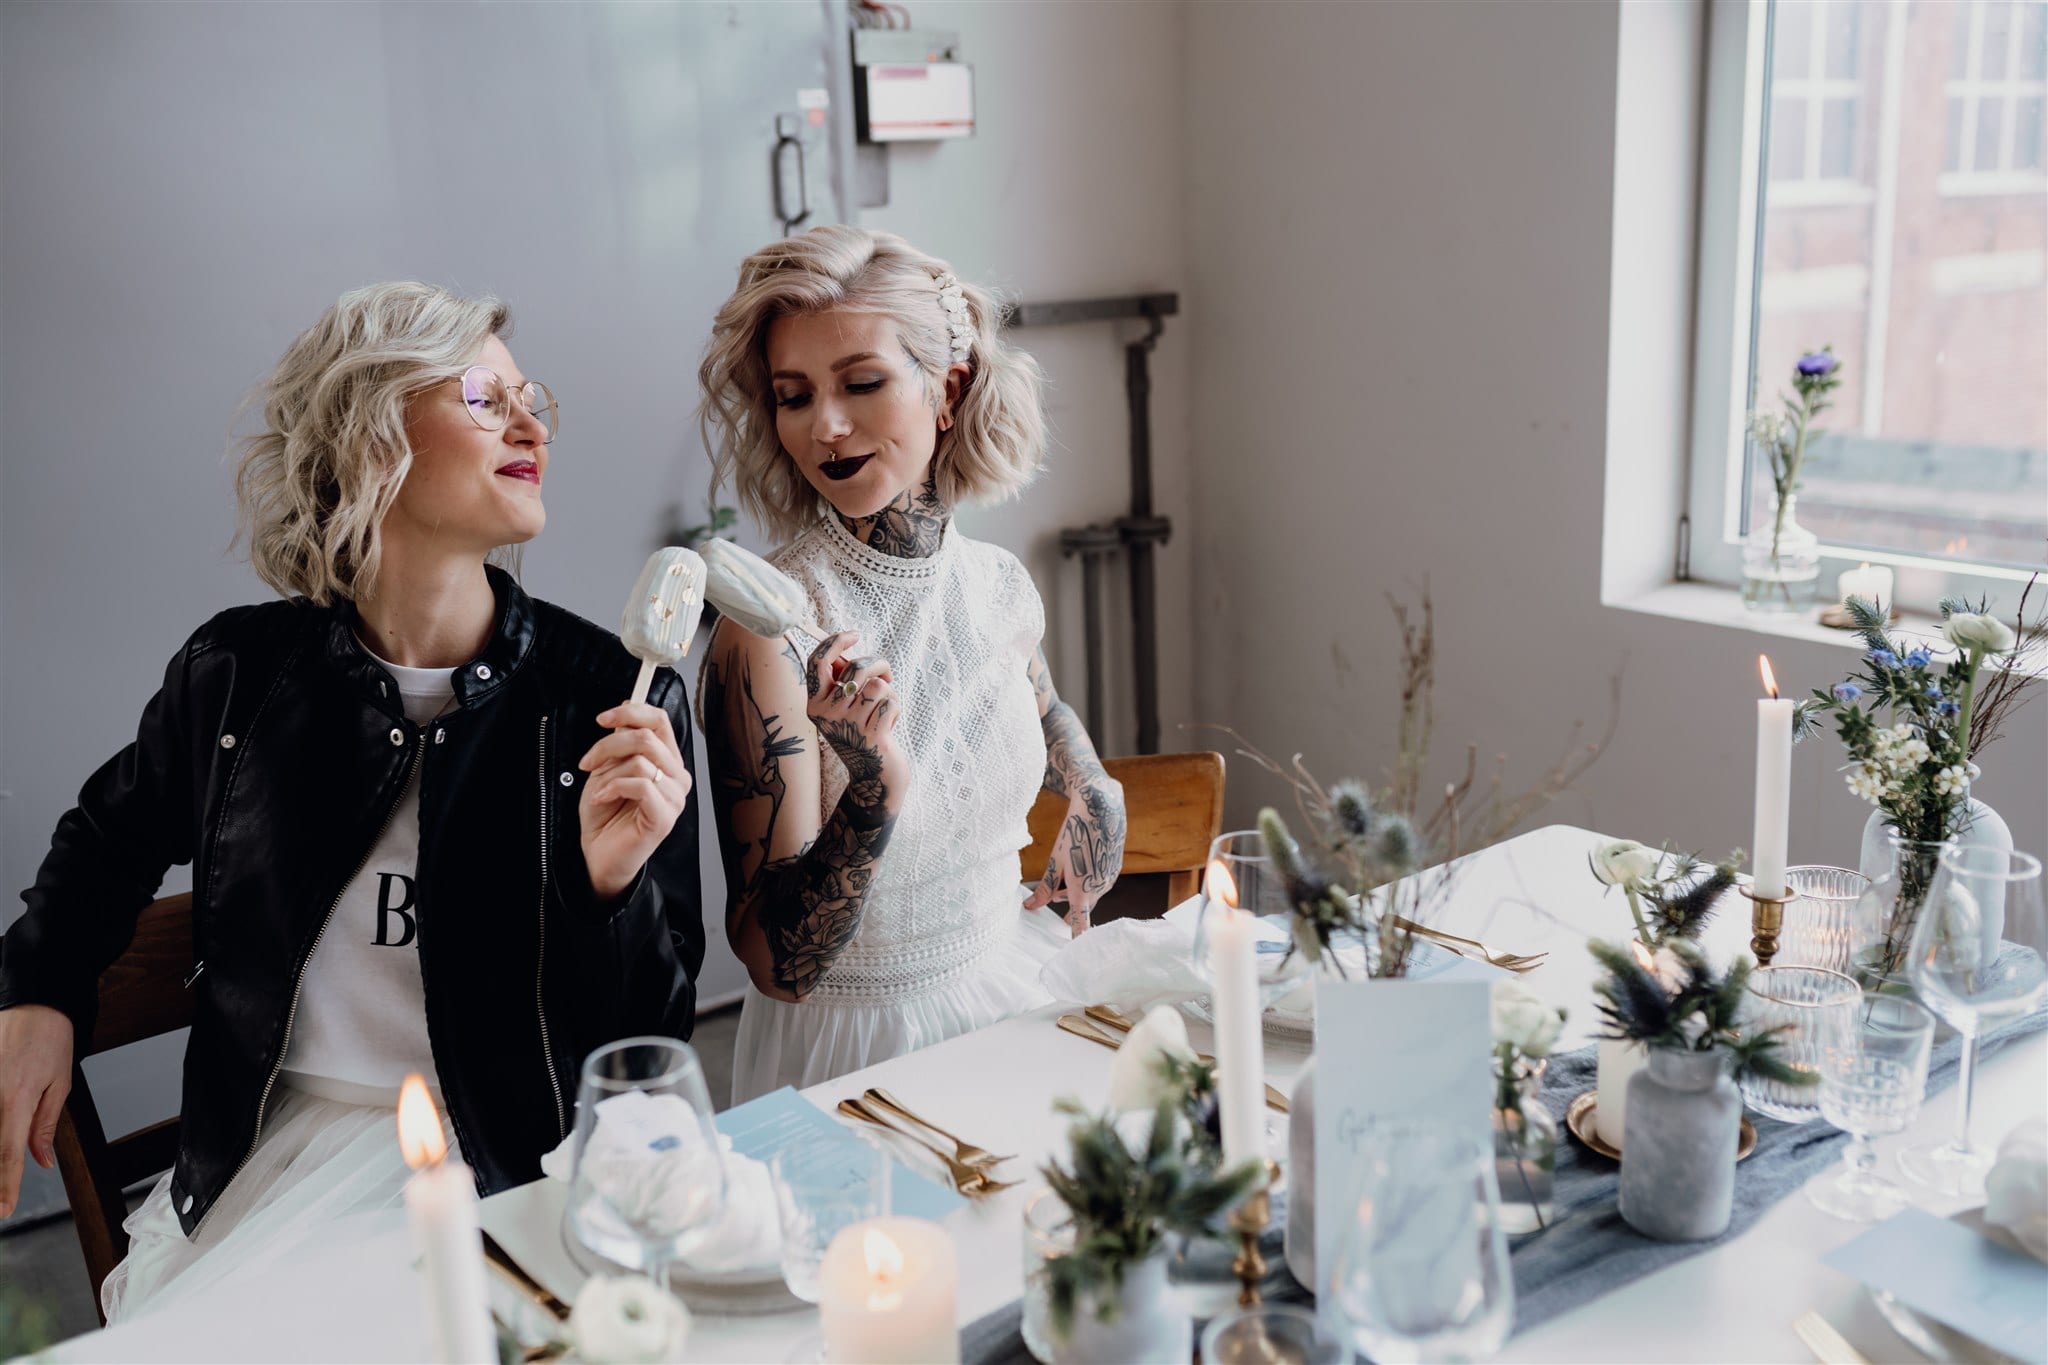 INDUSTRIAL SOFT EDGY STYLED SHOOT